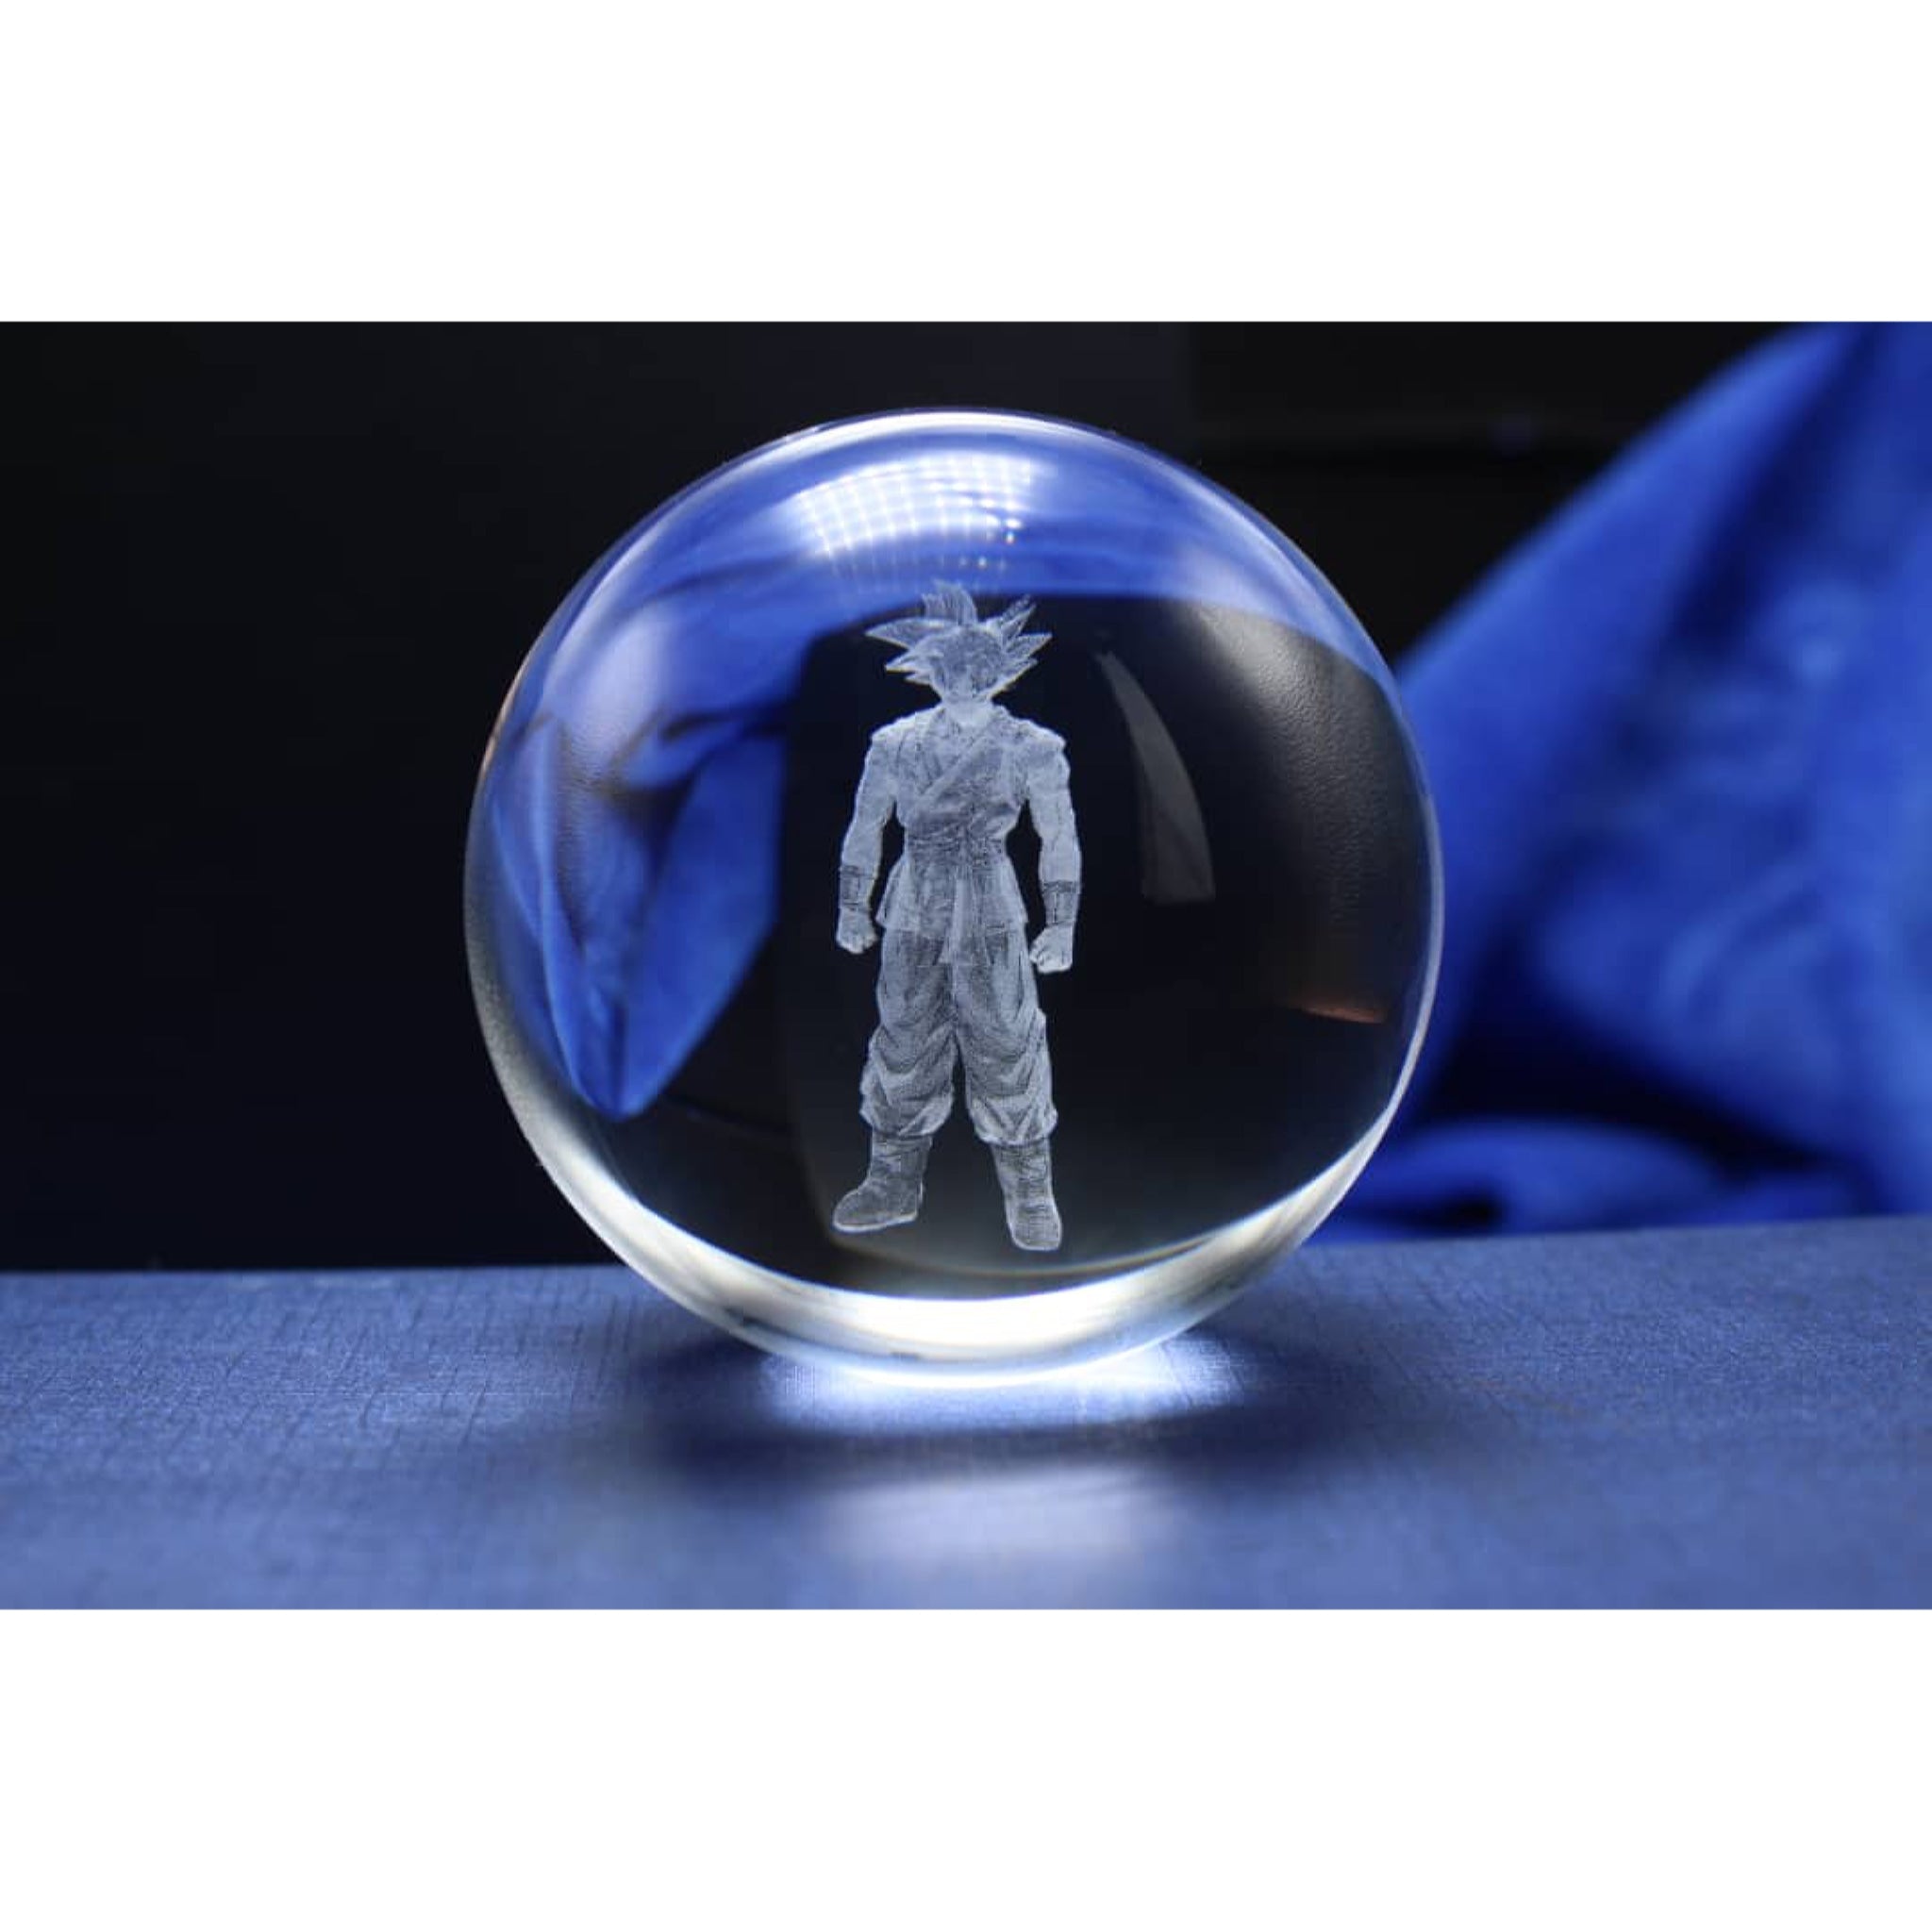 Goku Character Glass Crystal Ball 65 with Light-Up LED Base Ornament 80mm XL Size